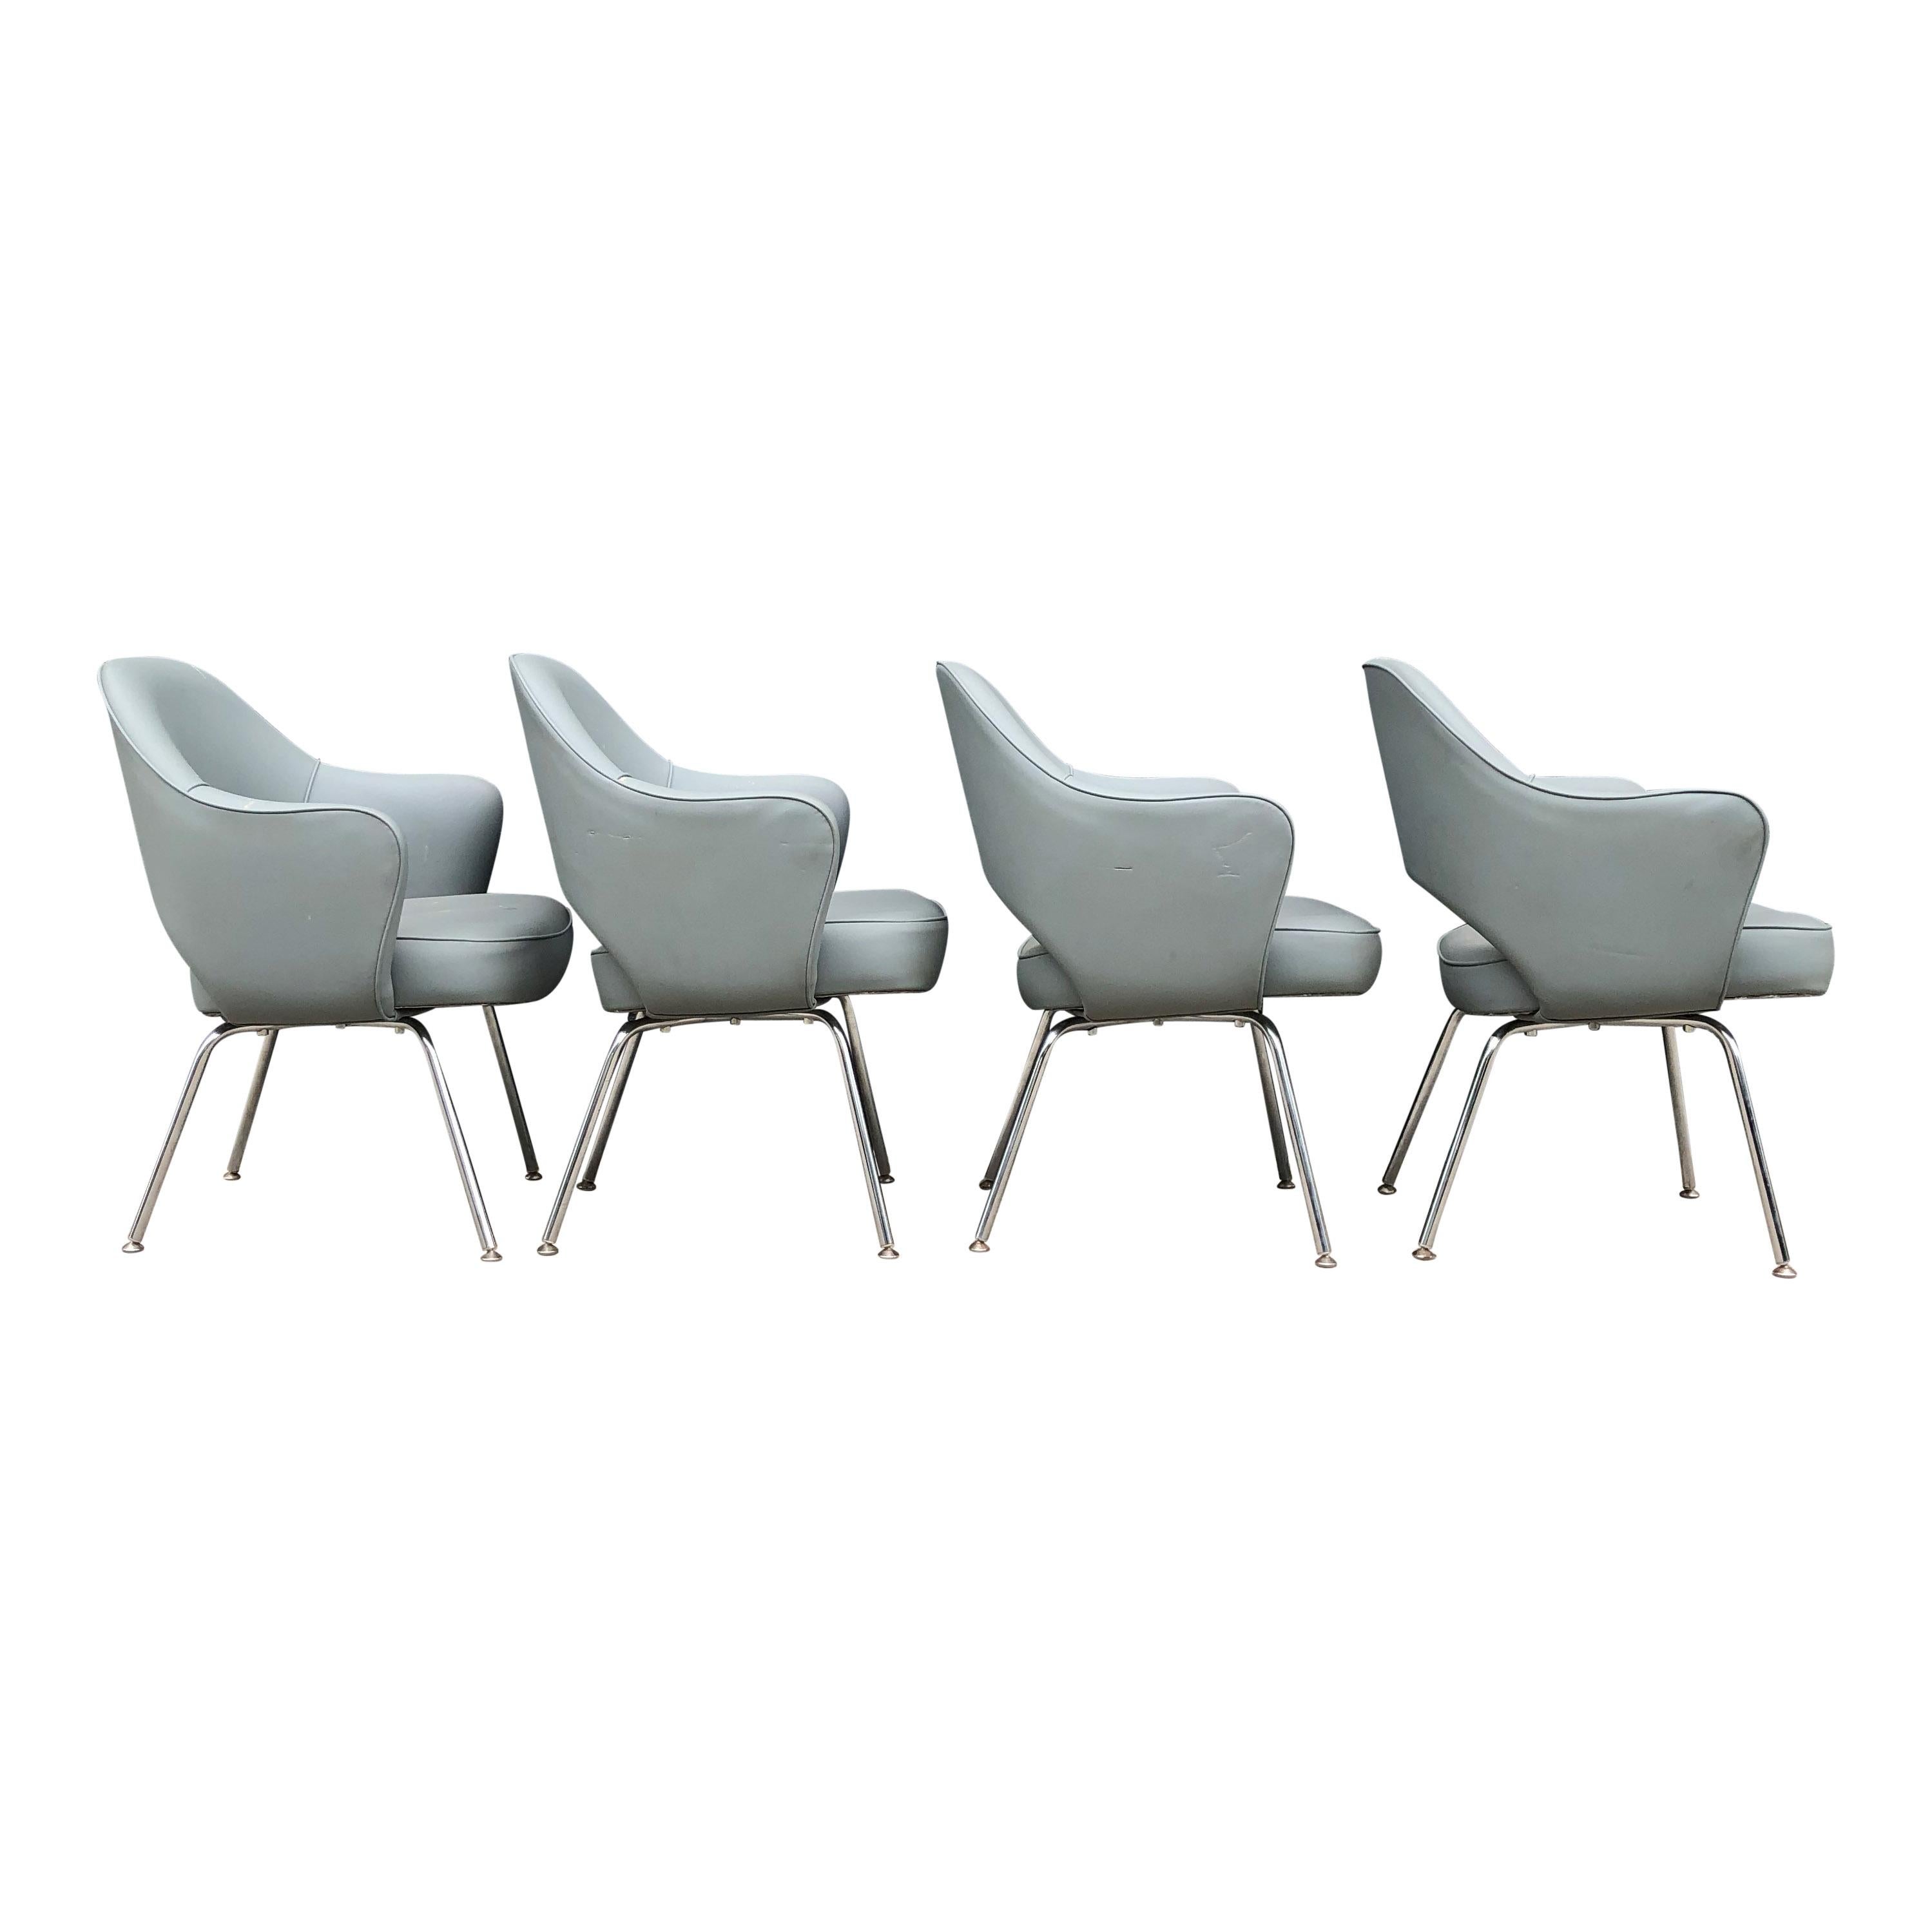 For your consideration are up to 11 Eero Saarinen for Knoll executive chairs.

Note: These chairs need and are intended for those who want to reupholster.

These chairs are icons of Mid-Century Modern design and characteristic of Saarinen's